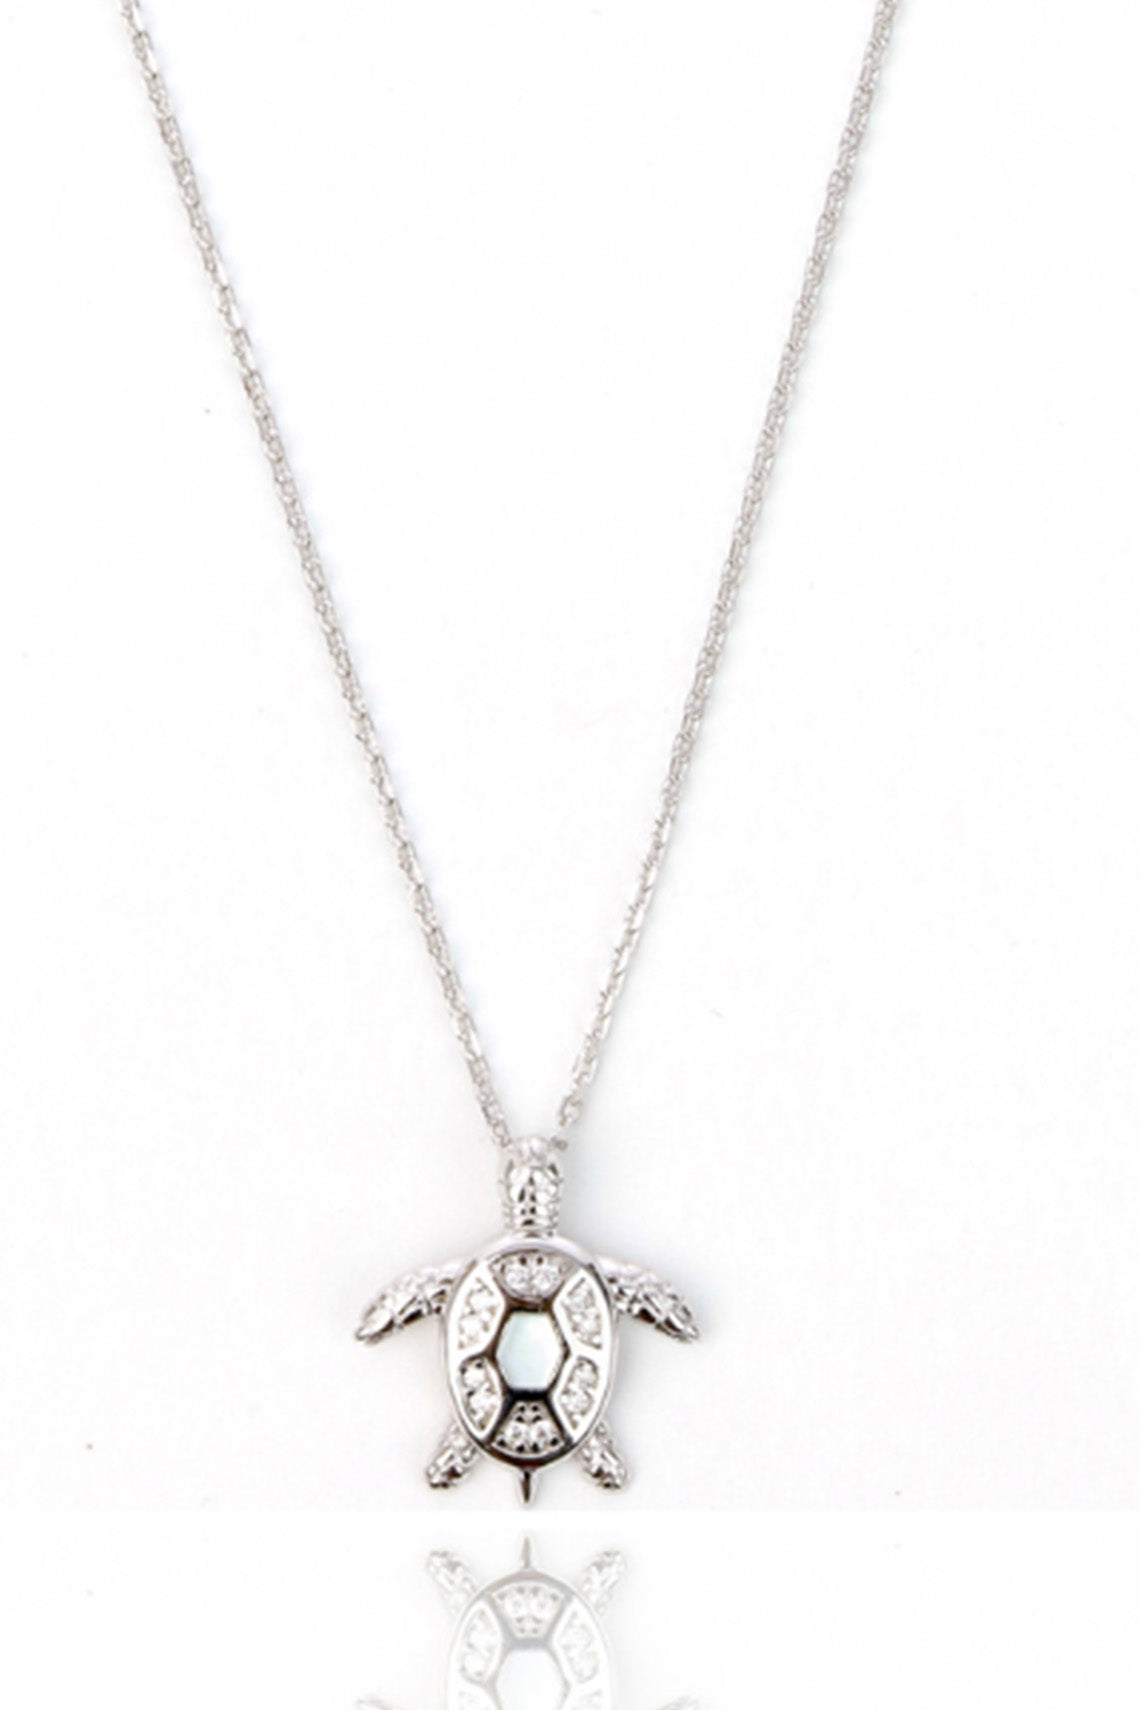 OCEANS SEA TURTLE MOTHER OF PEARL NECKLACE SILVER